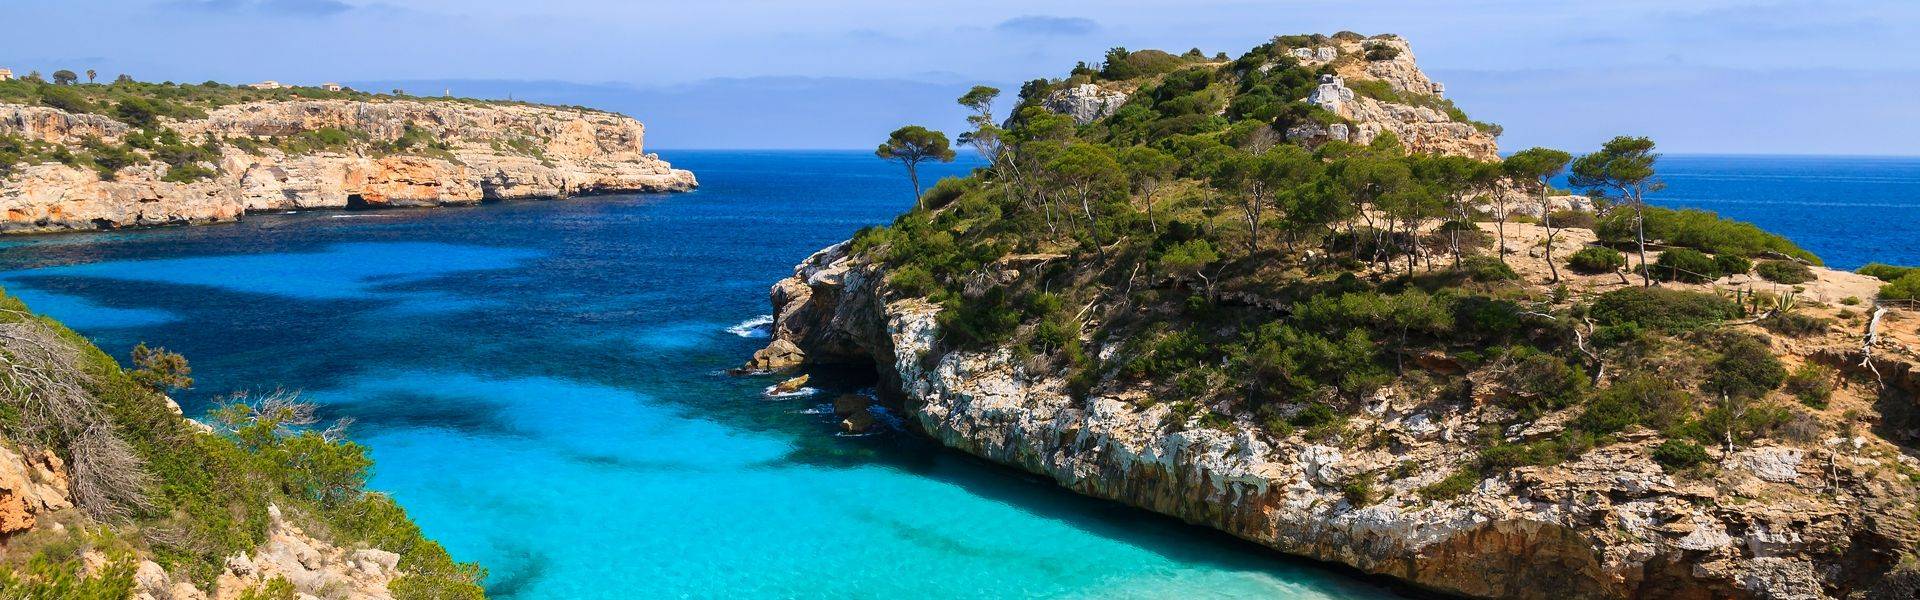 View of Cala des Moro beach and its azure blue water, Majorca island, Spain